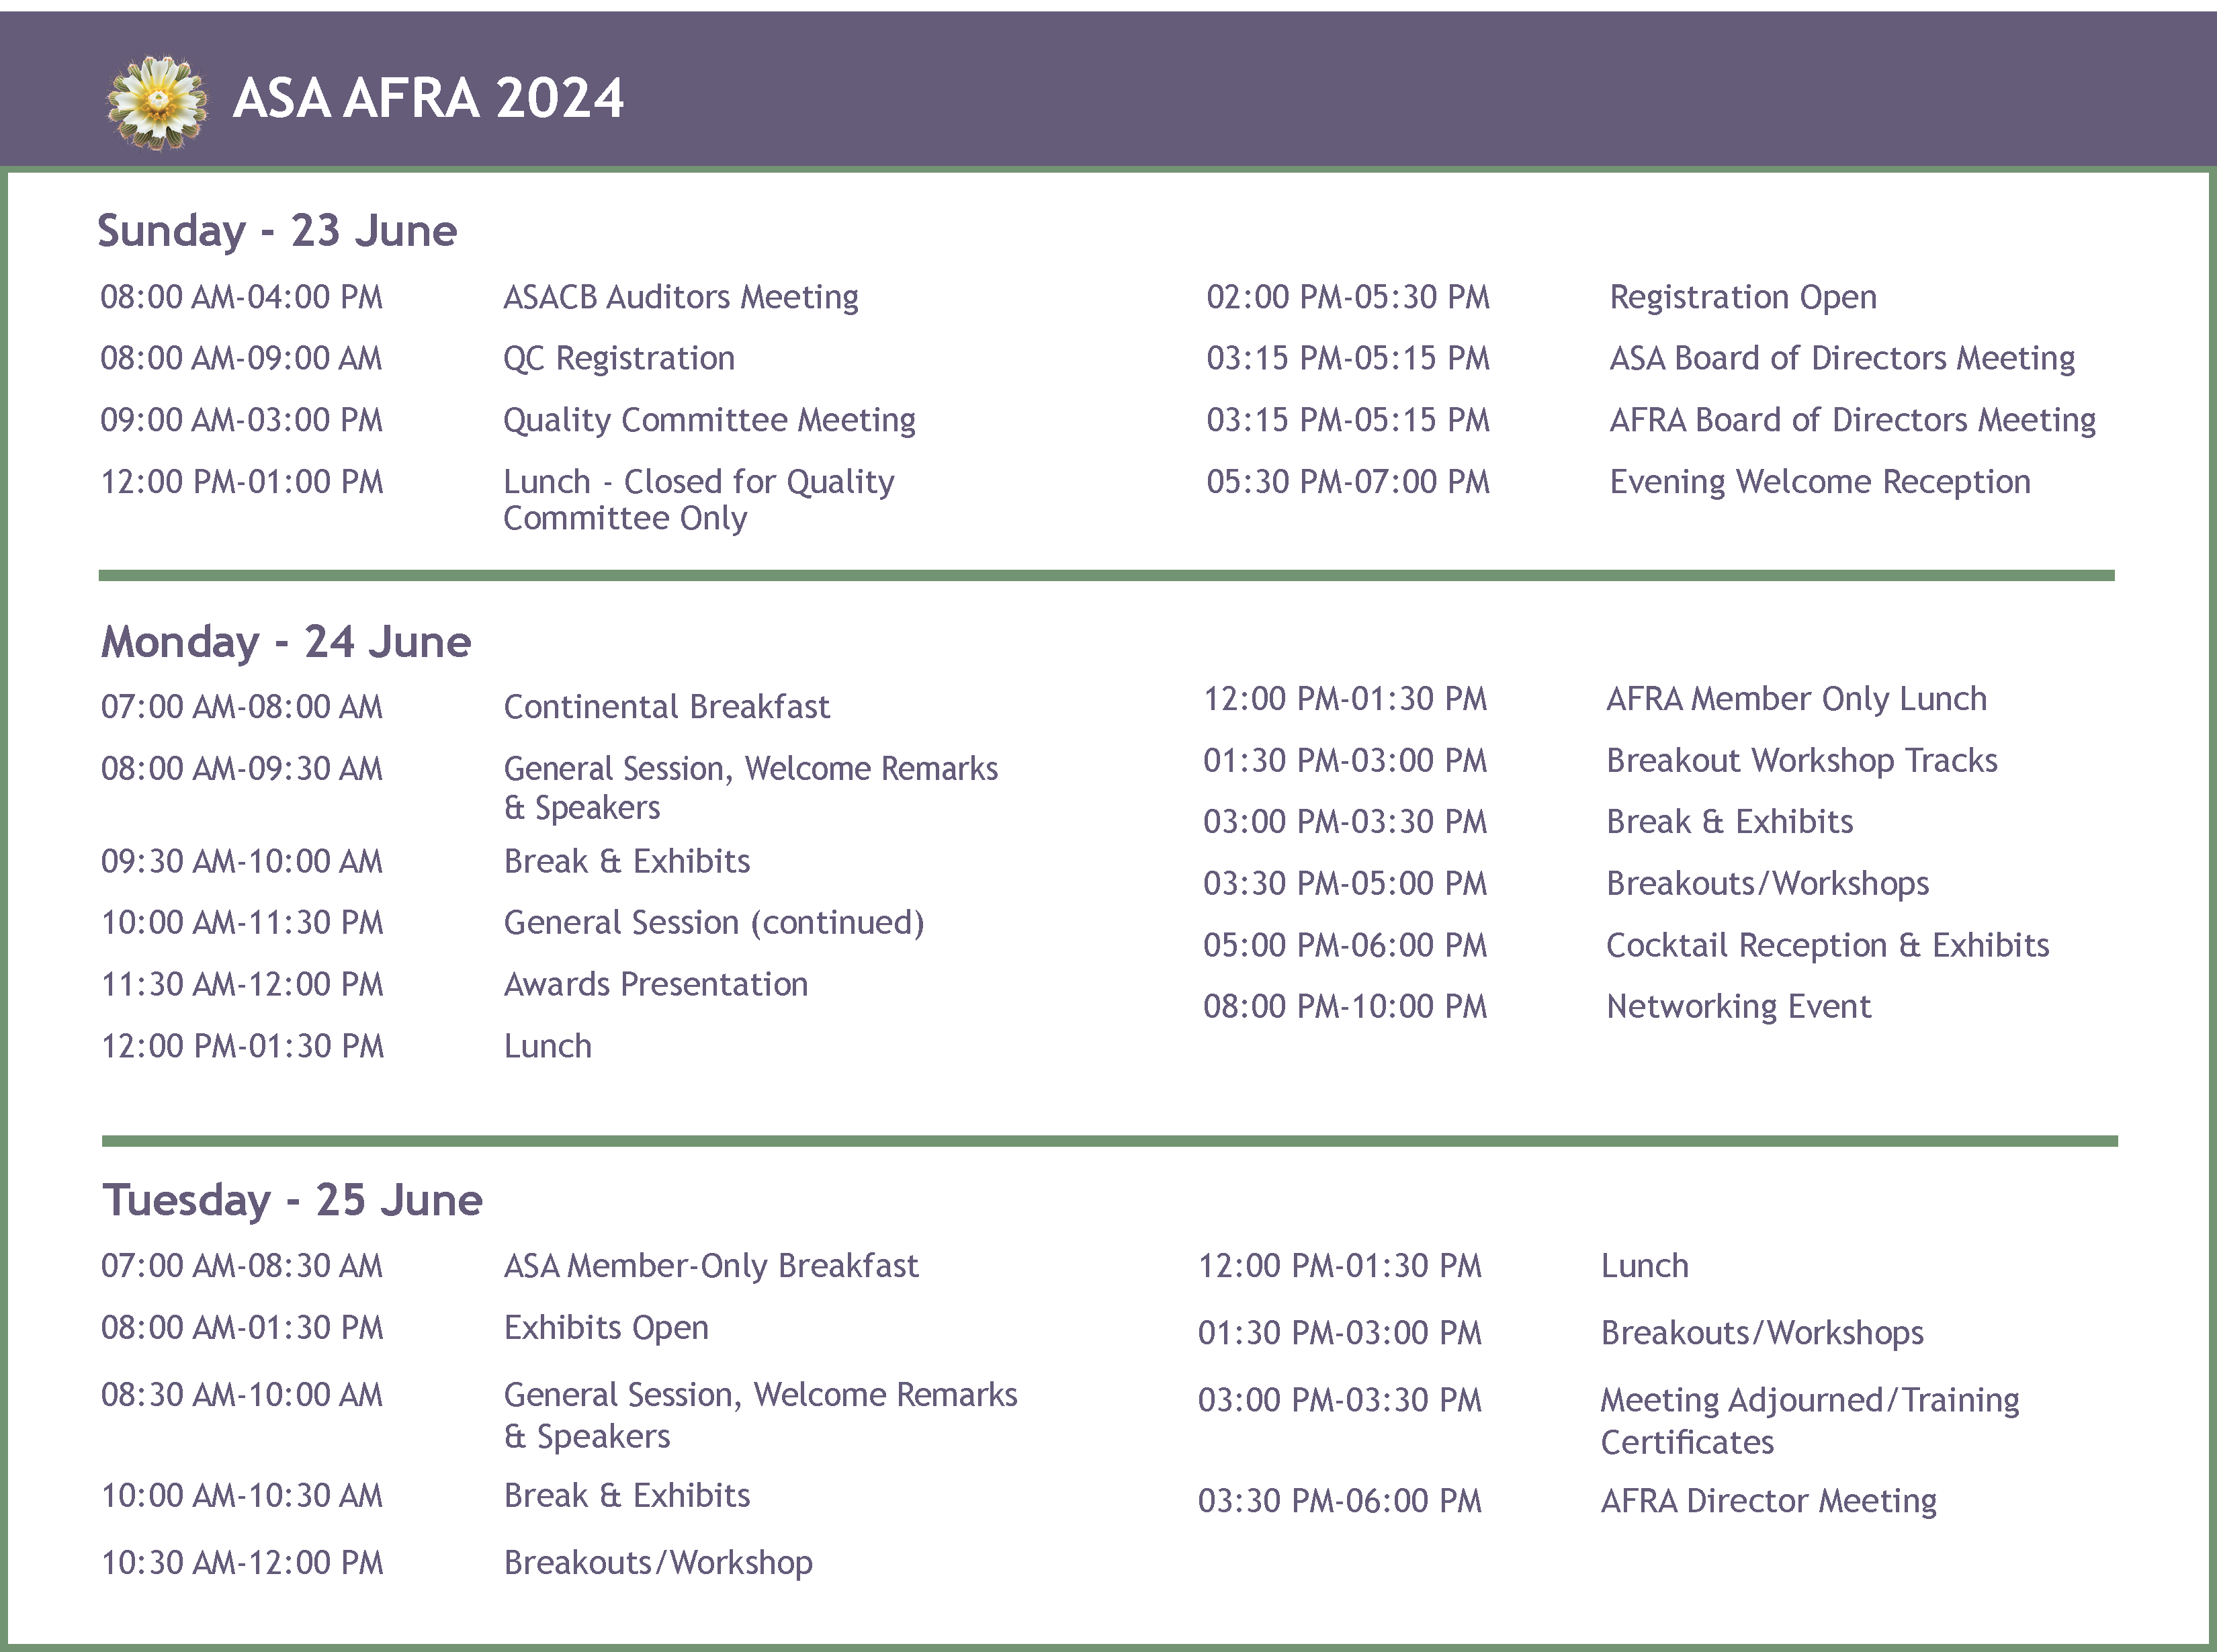 ASA AFRA 2024 Conference Schedule of Events